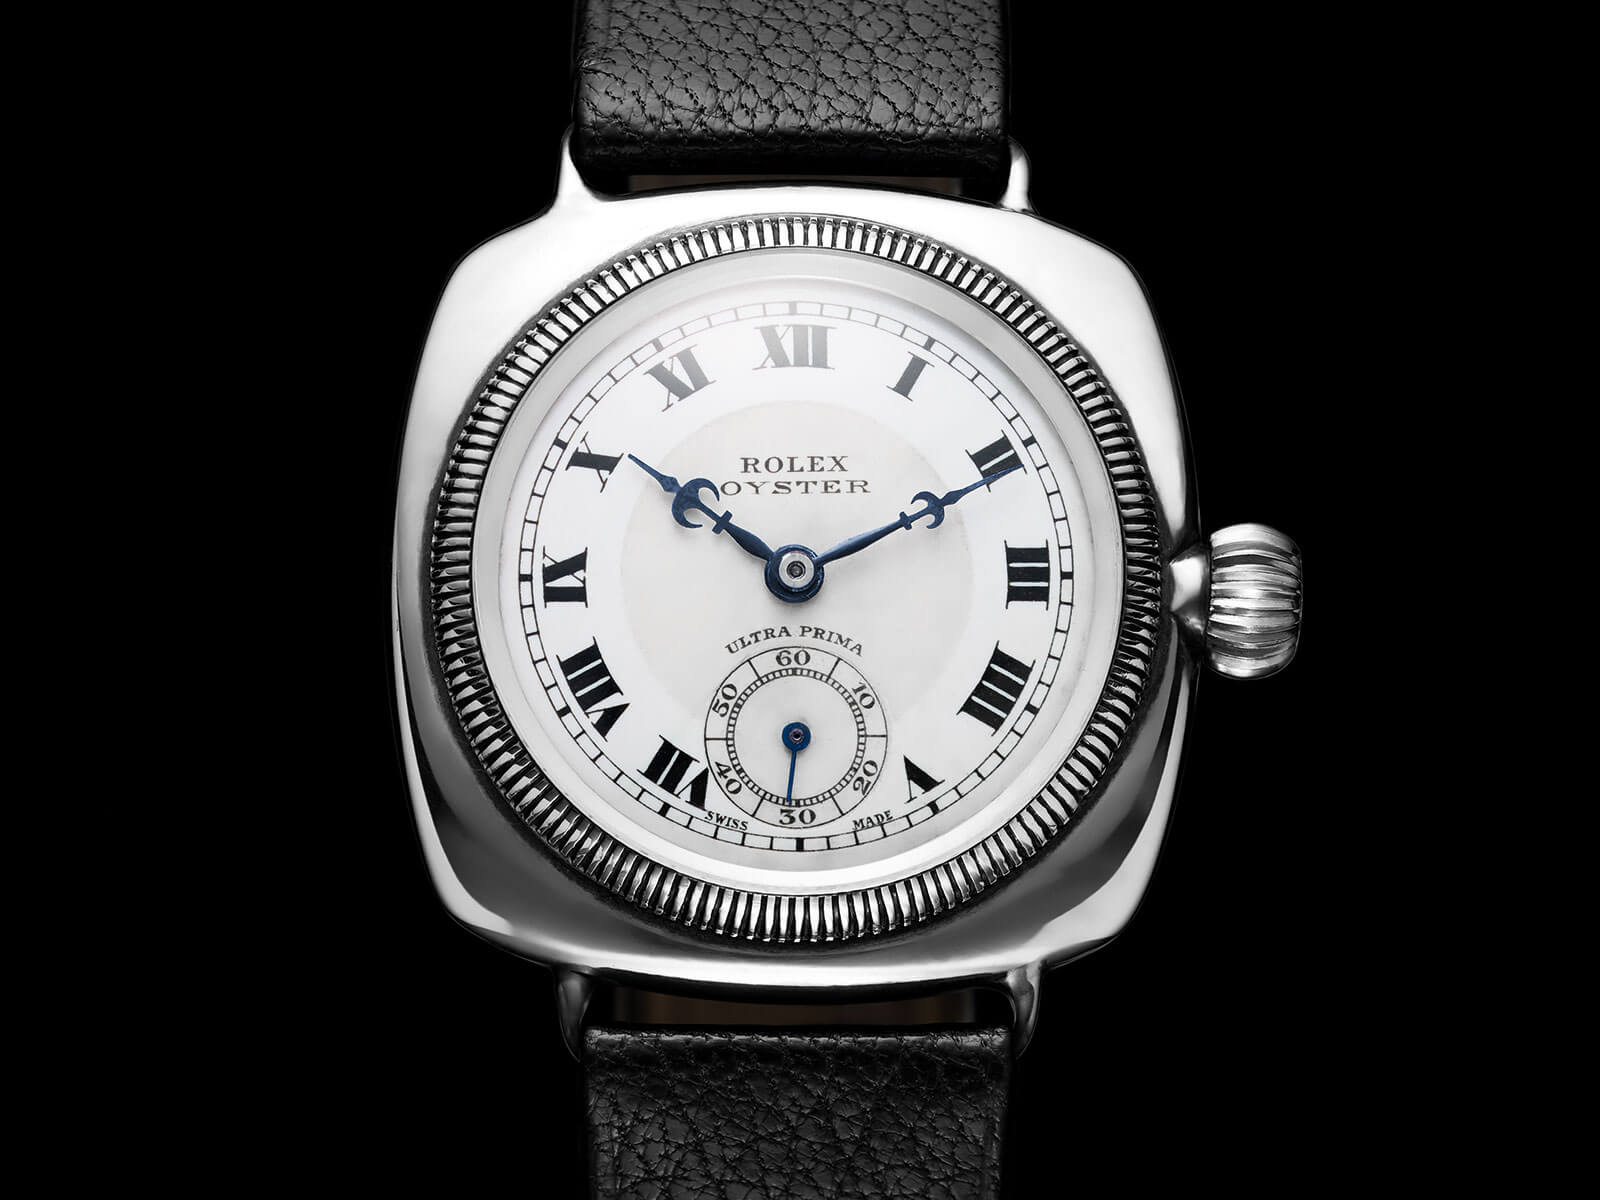 Rolex introduced the first waterproof watch in 1926